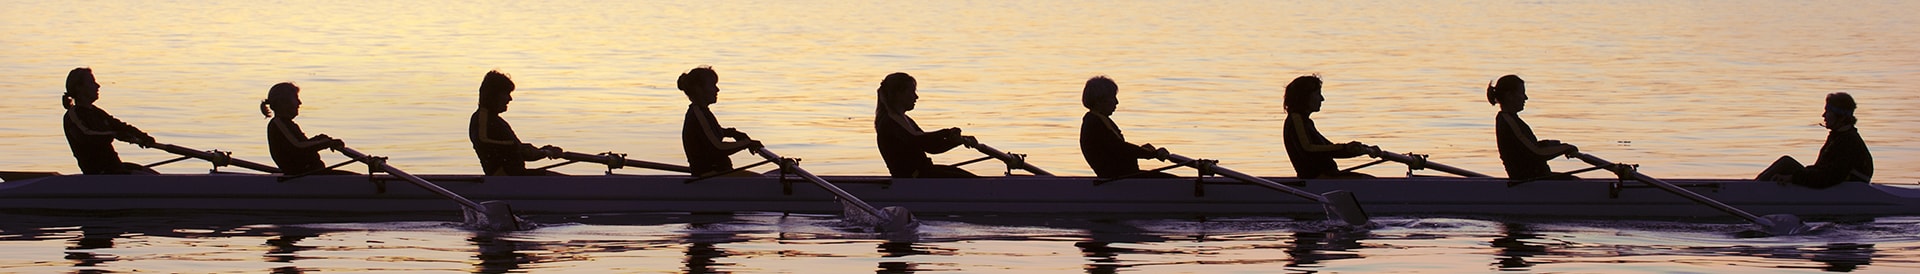 people rowing canoes in sunset